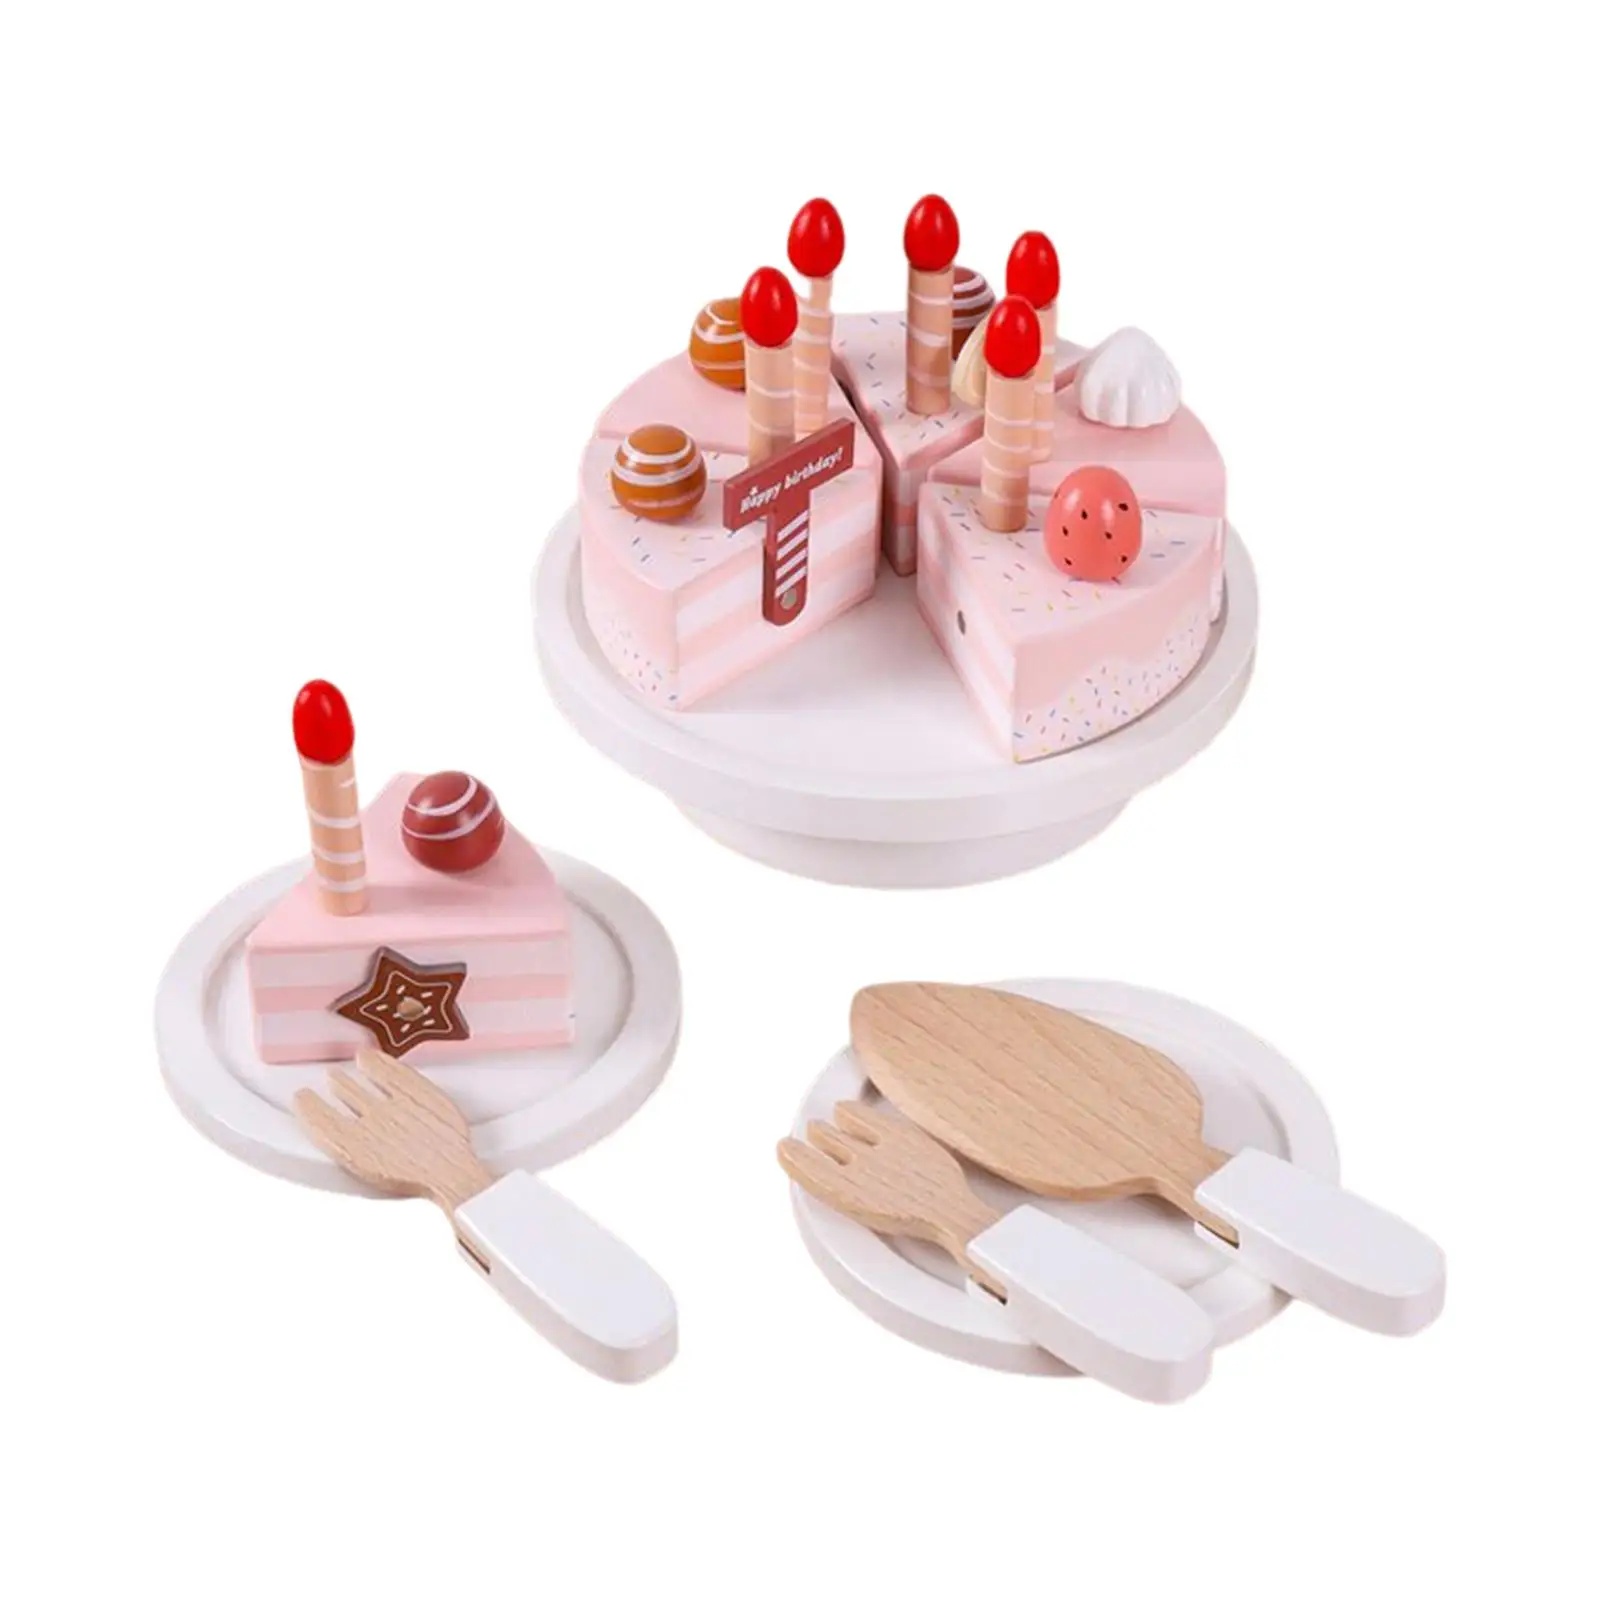 Simulation Wooden Cake Toys Indoor Activity Set Montessori Toys Education Cooking Toy Pretend Play for Children Holiday Gifts